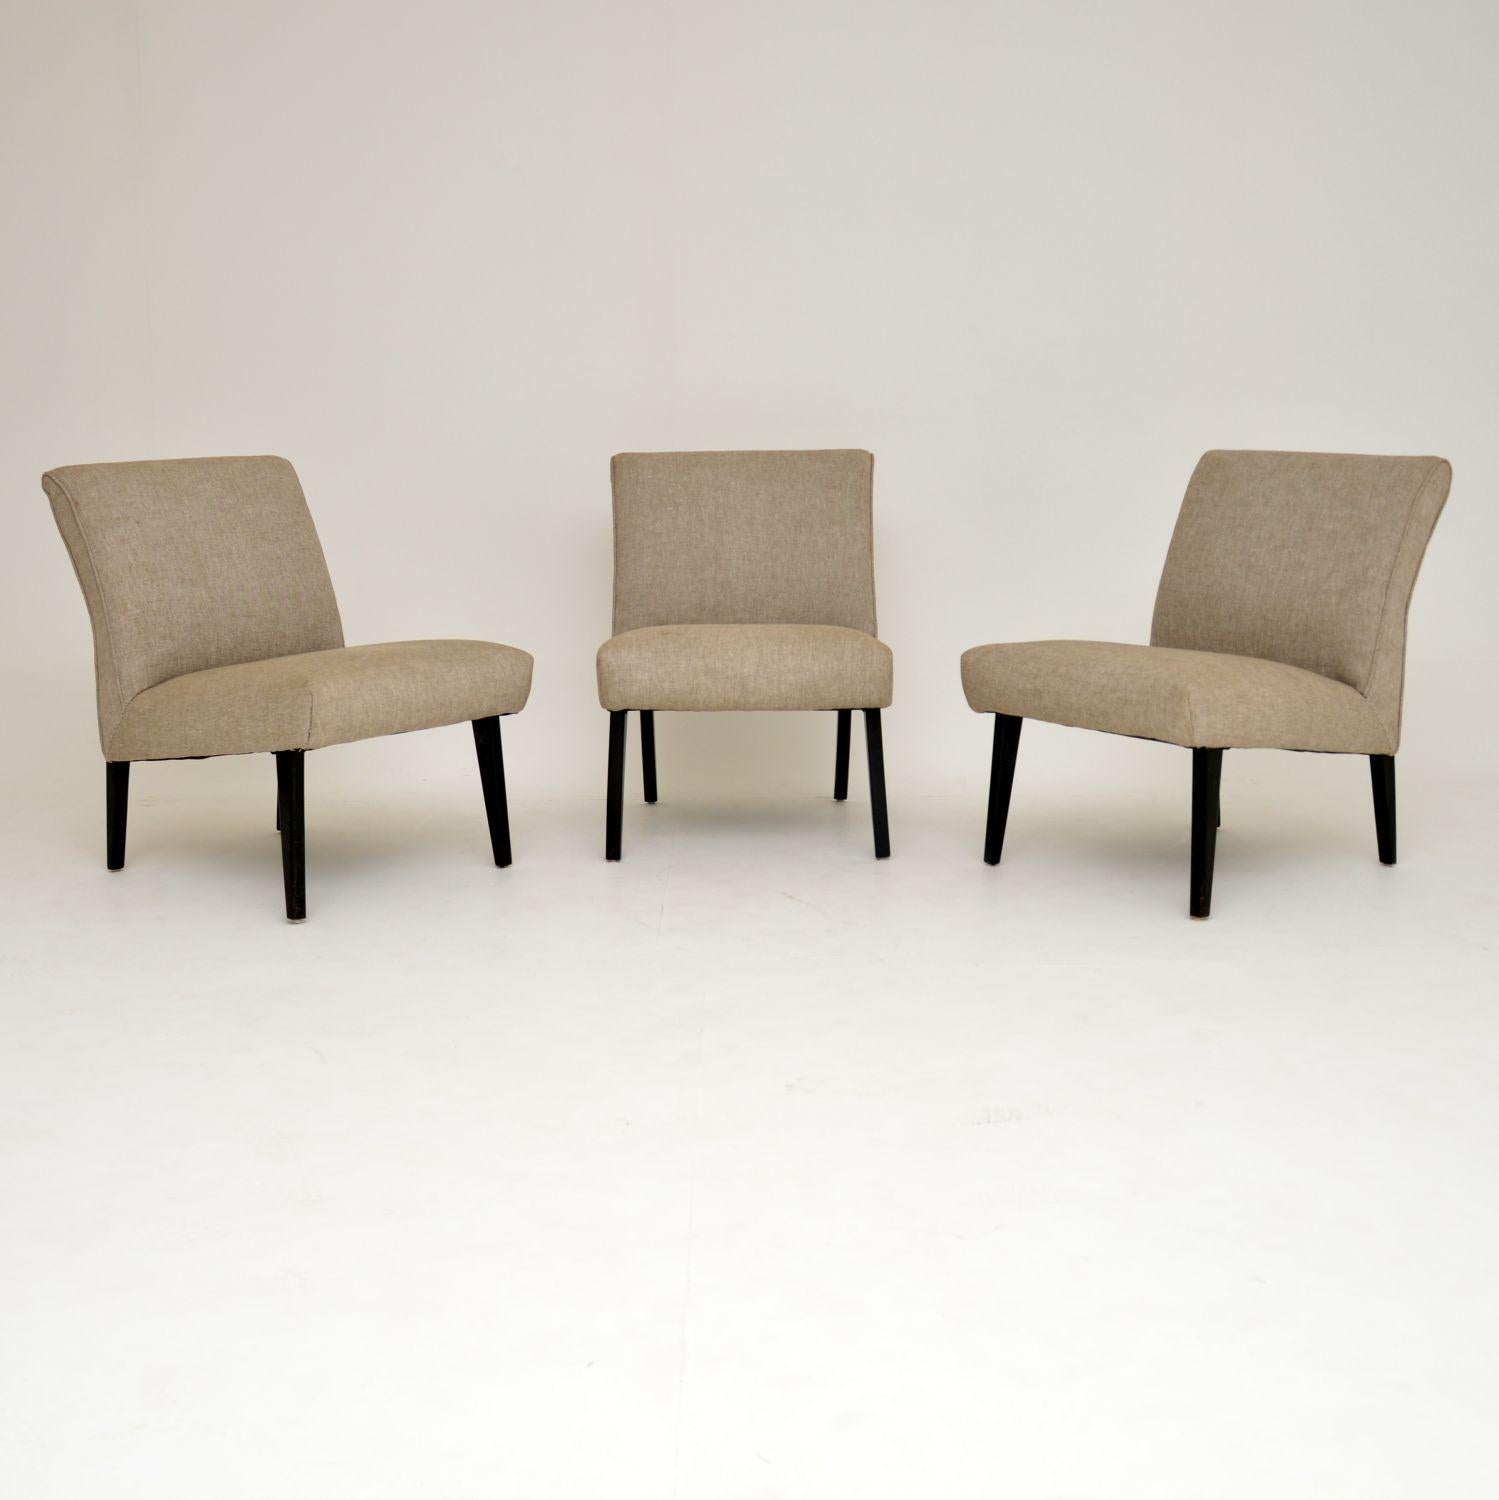 A great set of three vintage chairs from the 1960s. These can be used separately, or pushed together to make a small modular sofa. They are in lovely condition for their age, they look as if they were re-upholstered at some point. The fabric is a